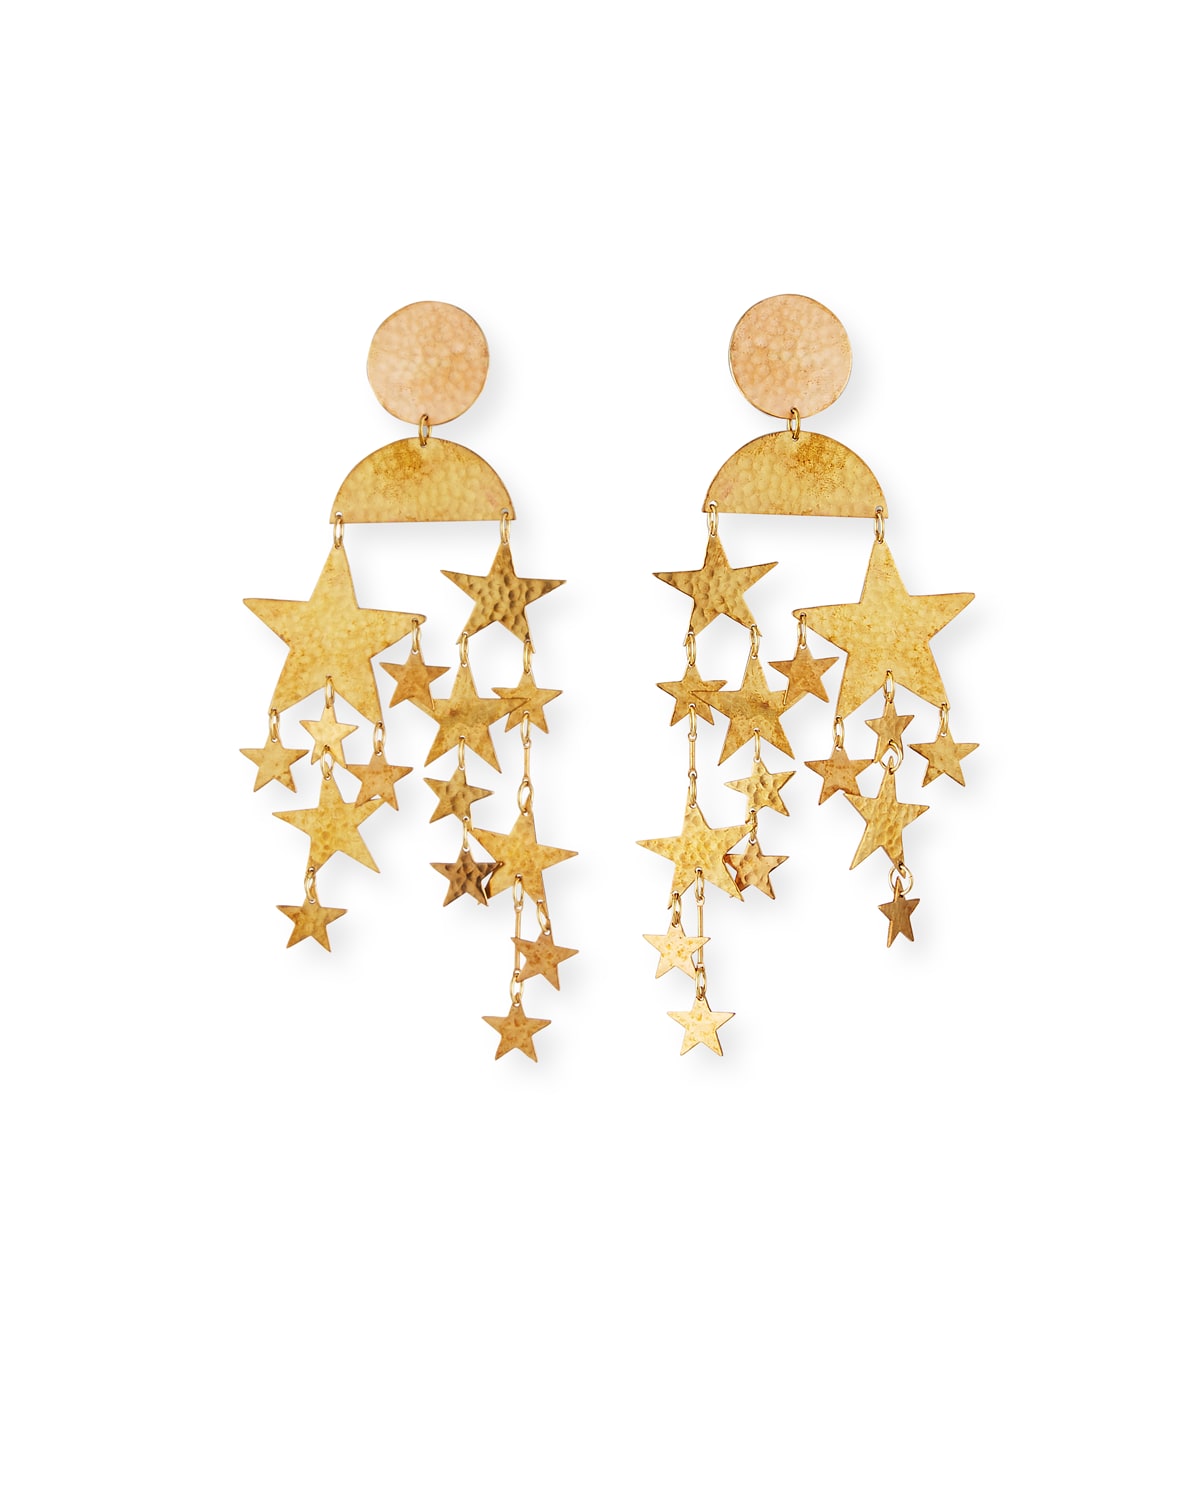 We Dream In Colour Cassiopeia Earrings, Gold